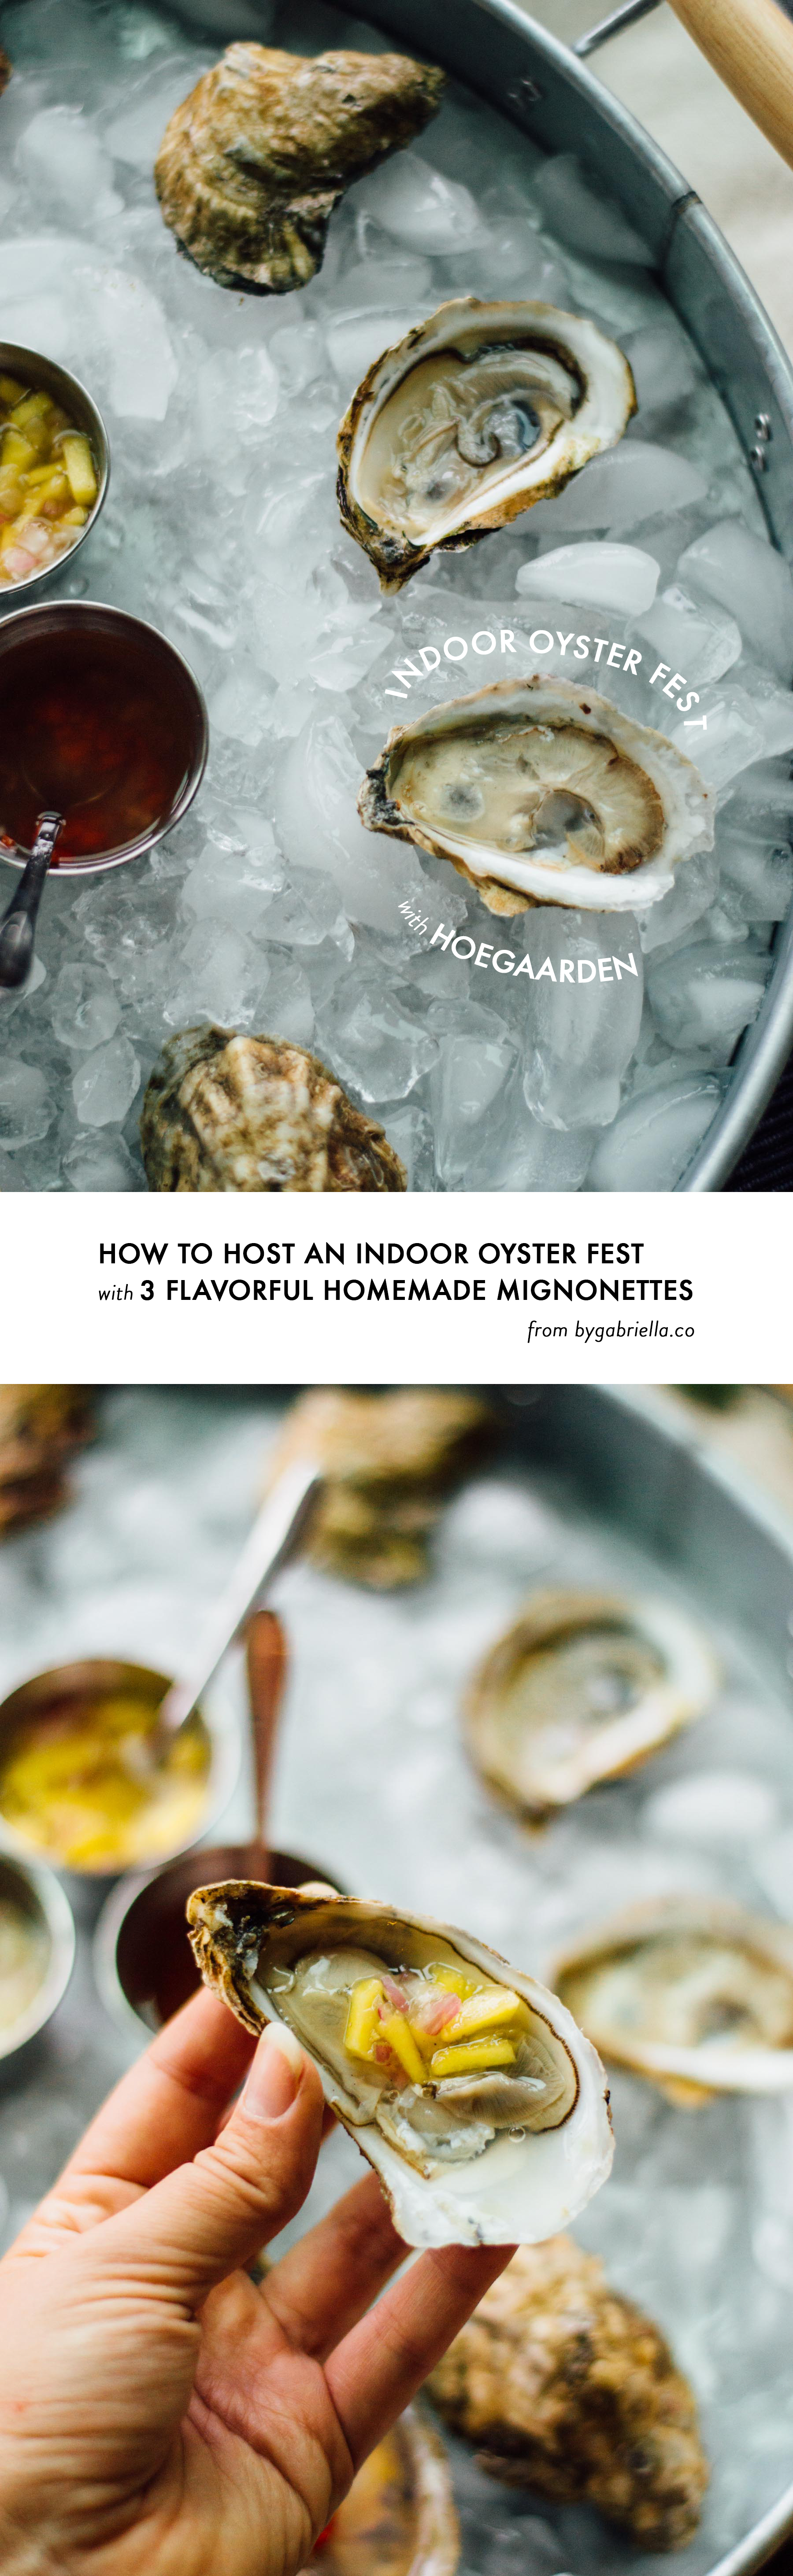 How to host an easy indoor oyster fest with Hoegaarden beer and 3 homemade mignonettes! | bygabriella.co